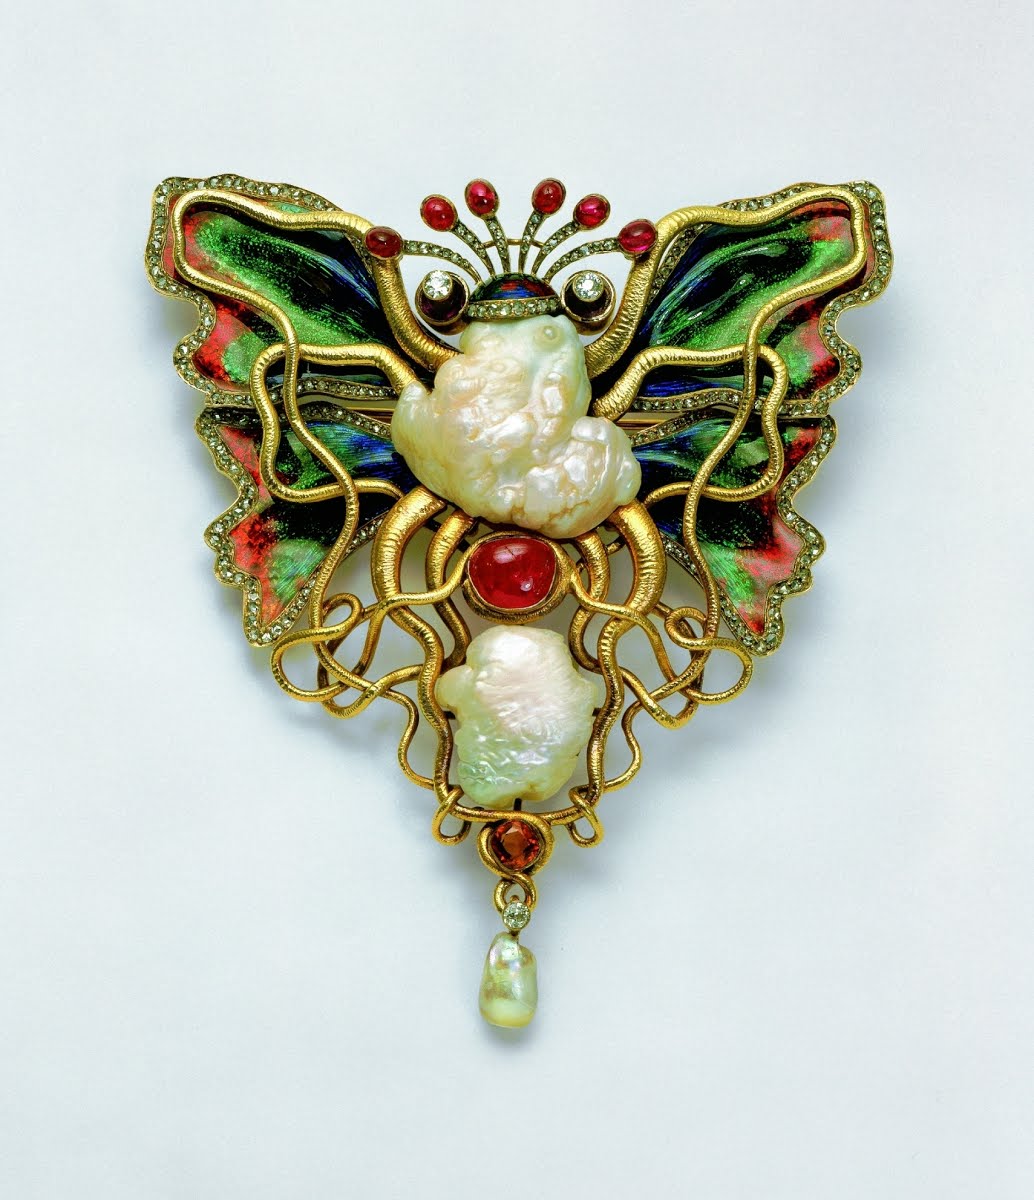 YYOGG Butterfly Brooch with Insect Brooches 